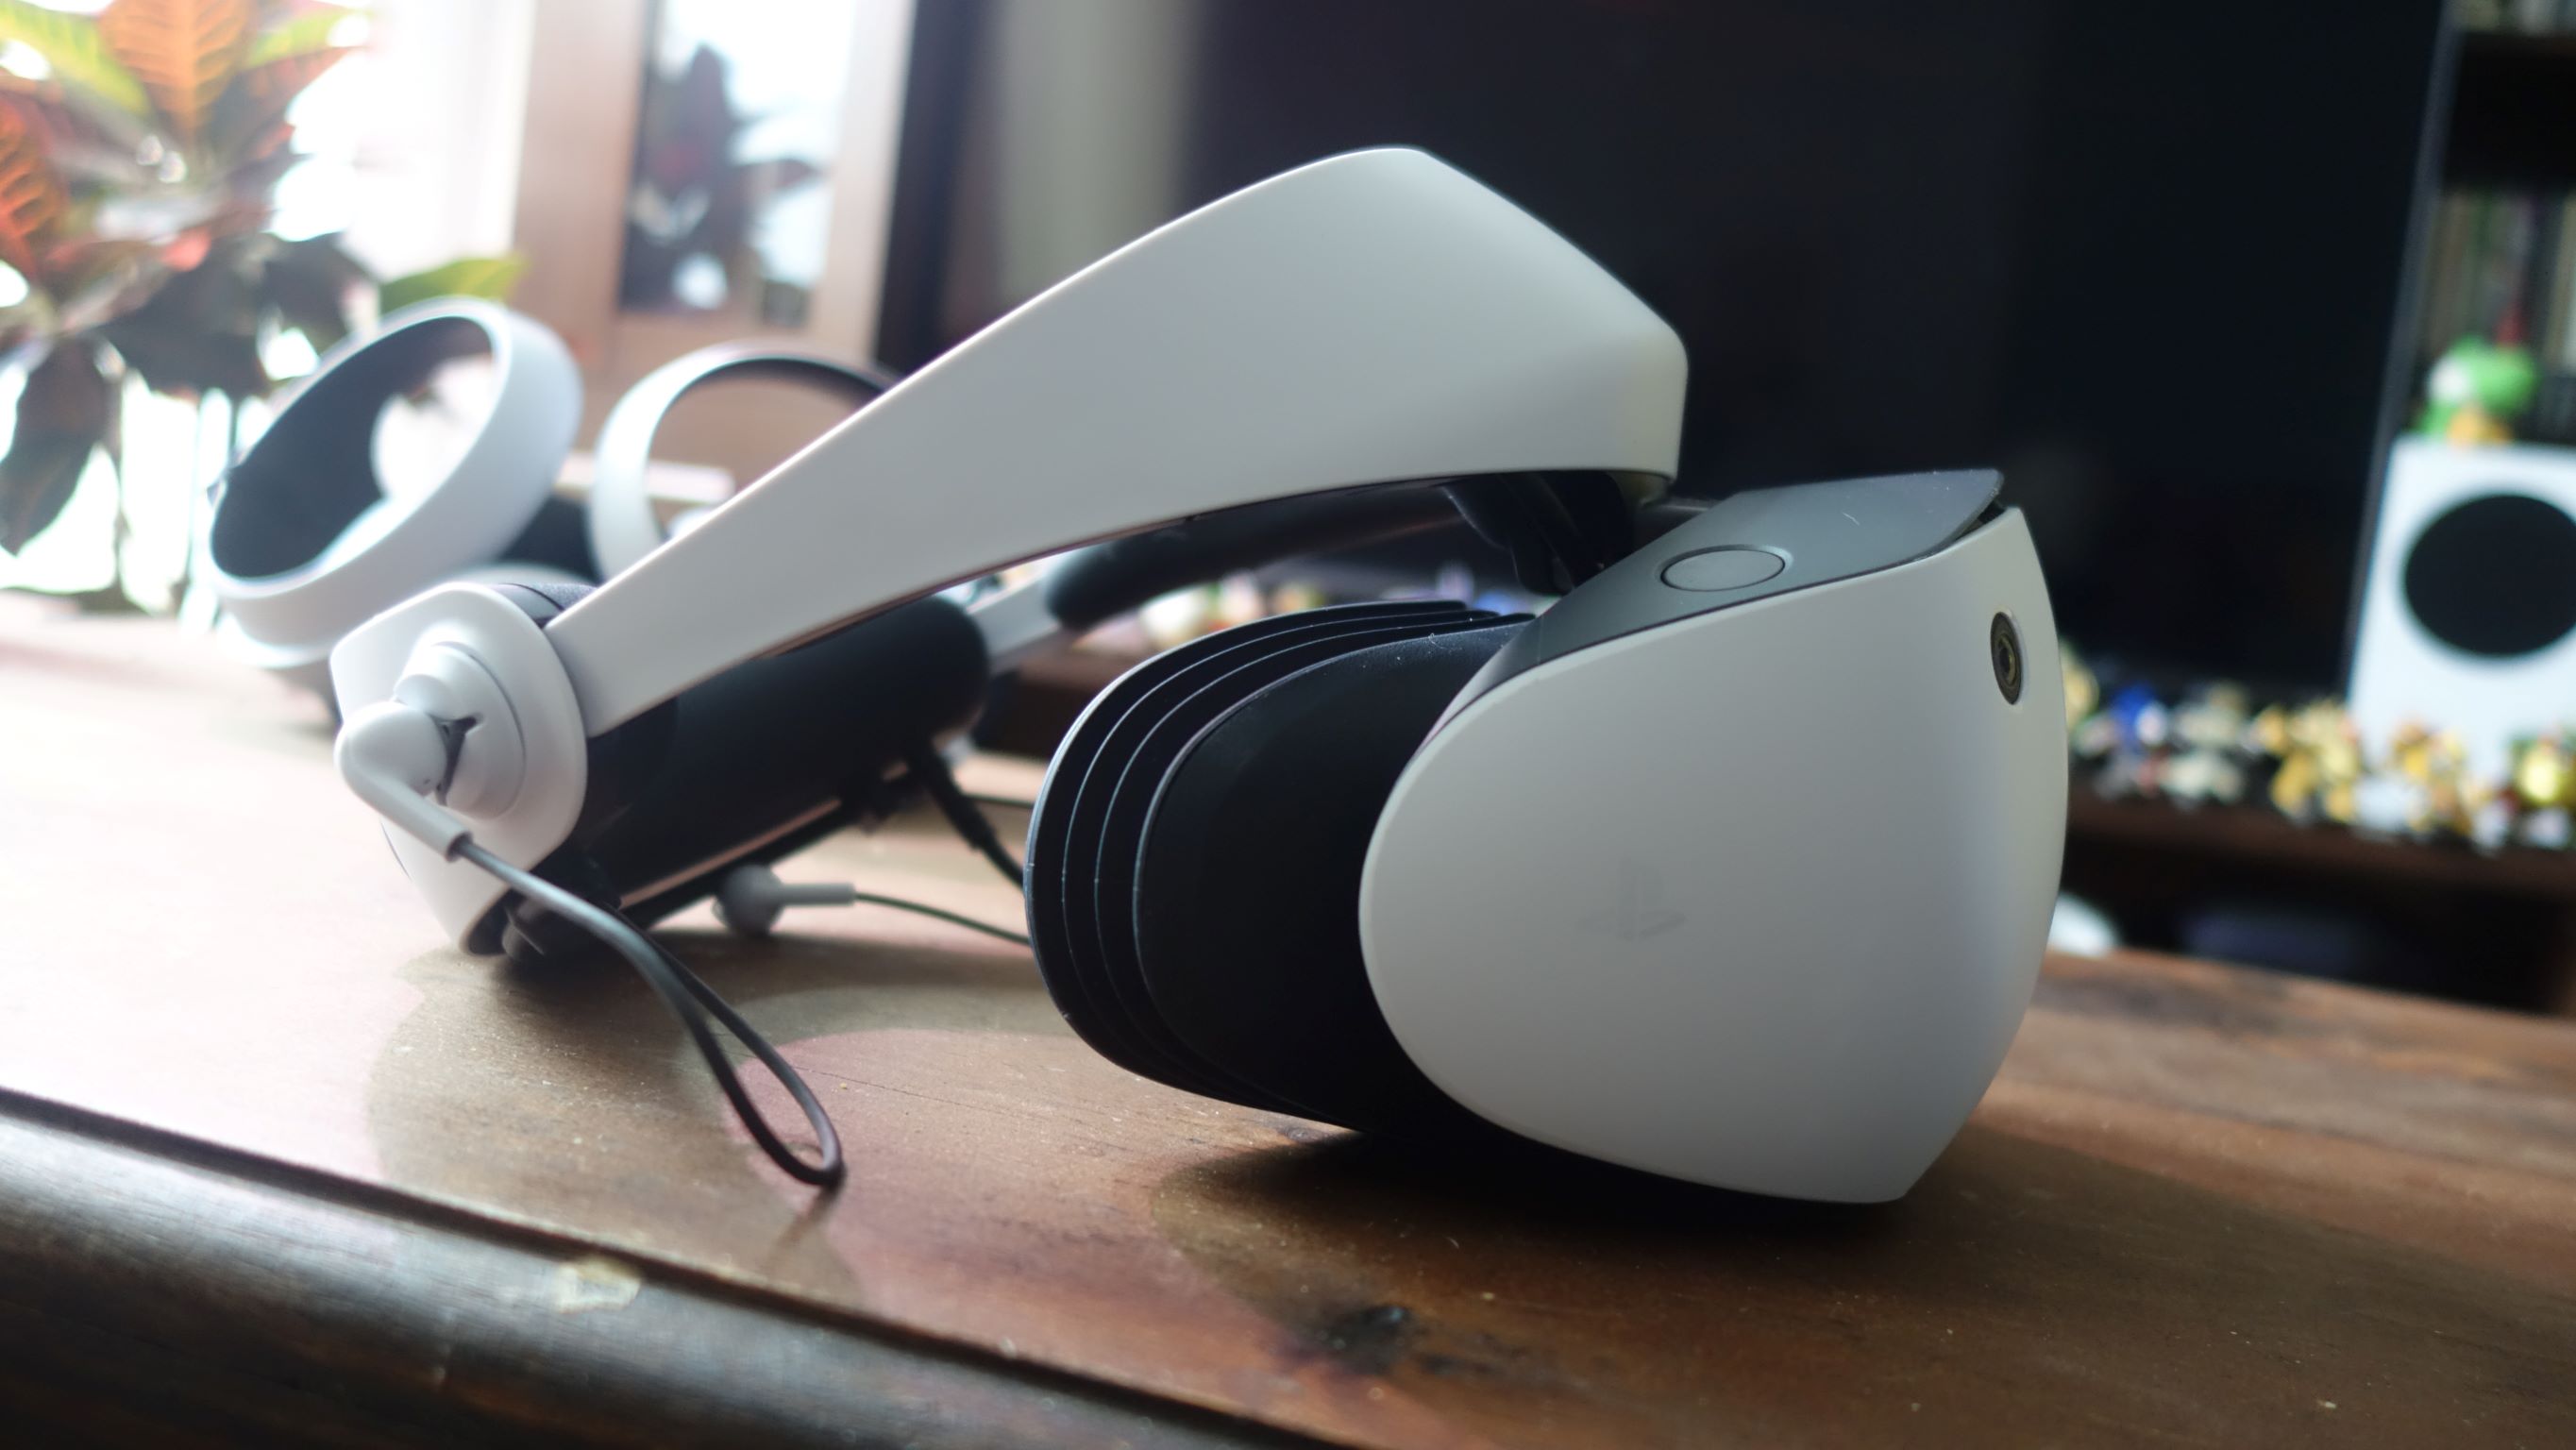 Does Sony's Playstation VR 2 work on a PC?